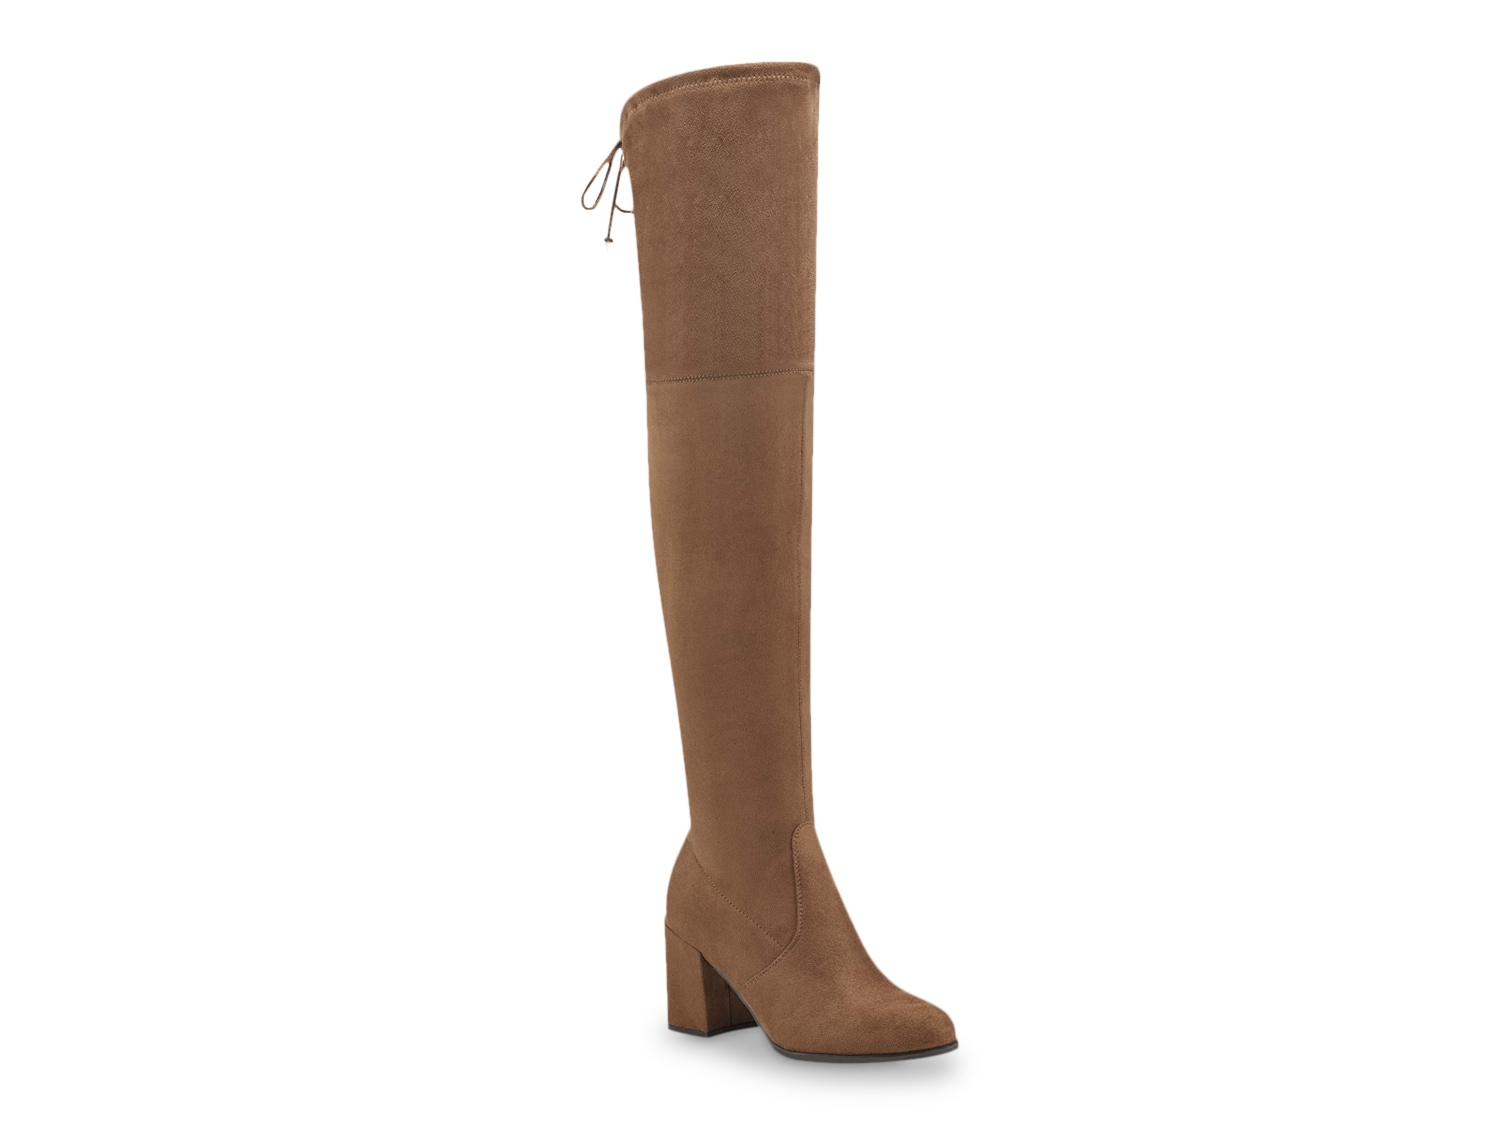 Unisa Denzel Over-the-Knee Boot - Free Shipping | DSW